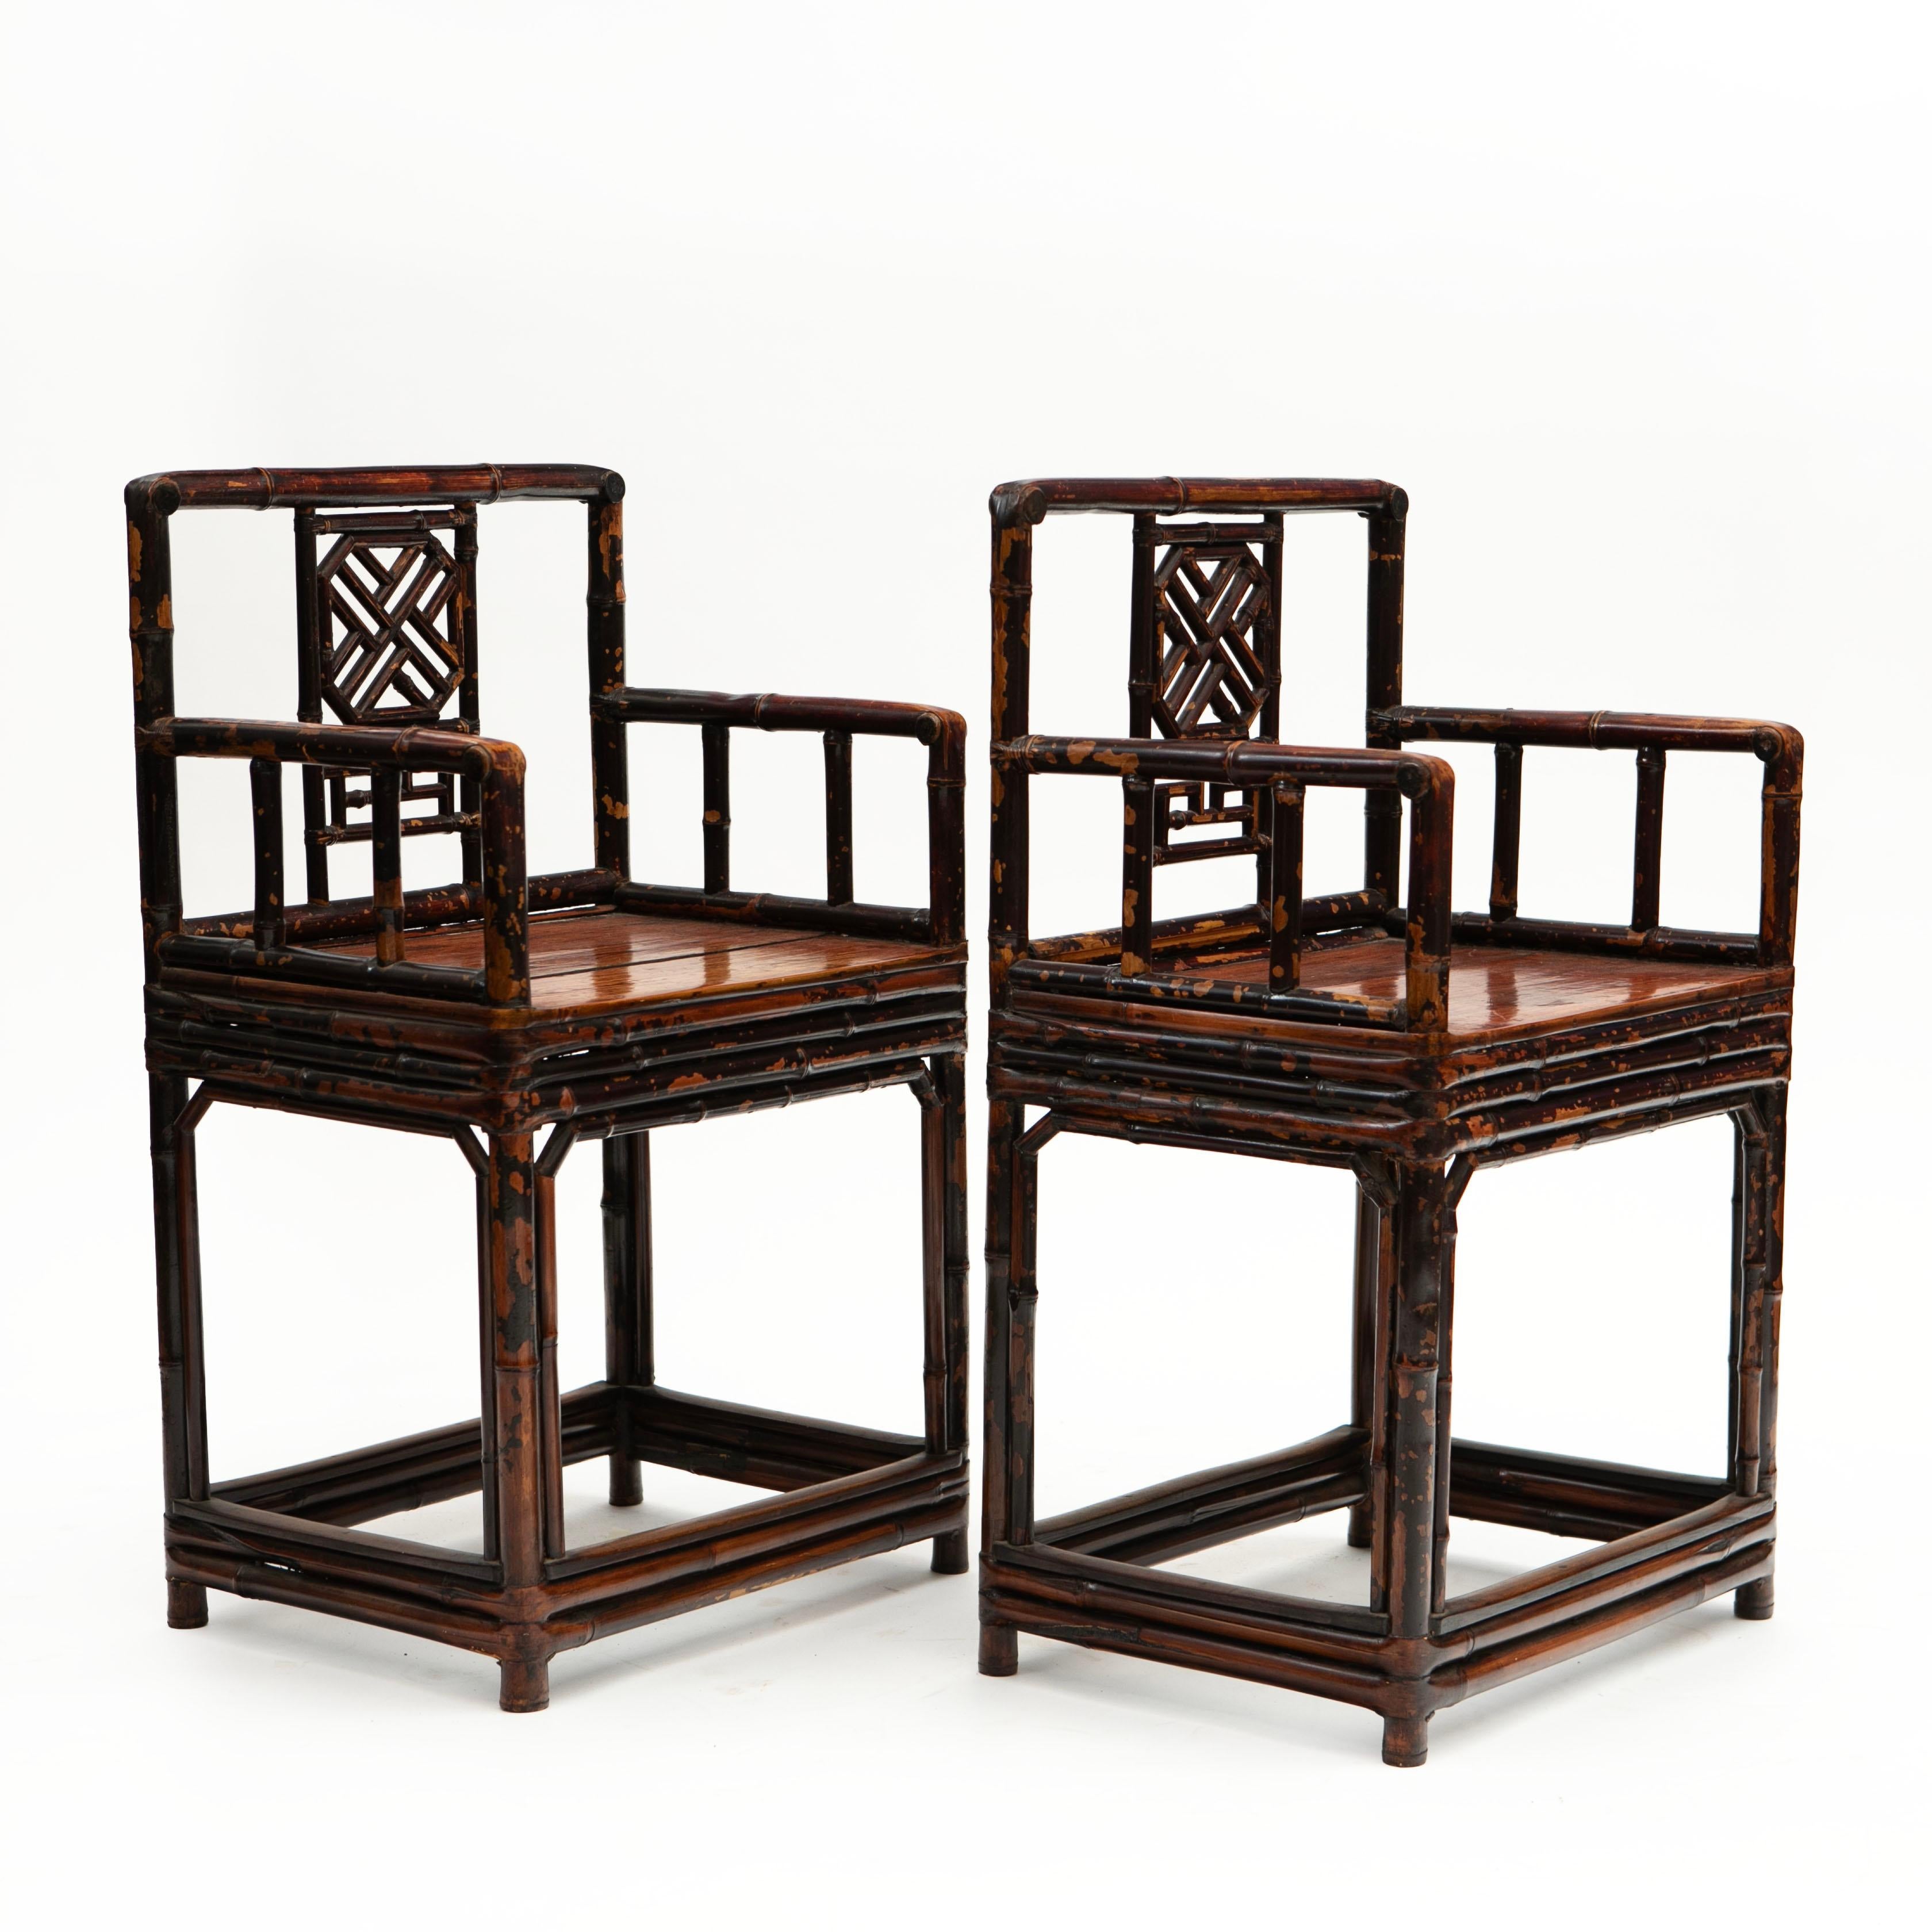 Pair of Chinese Qing period bamboo arm chairs with plain flat elm wood seat. Backrest with typical Chinese geometrical fretwork patterns.
Both chairs has a nice burgundy lacquer with beautiful natural age-related patina highlighted by a clear